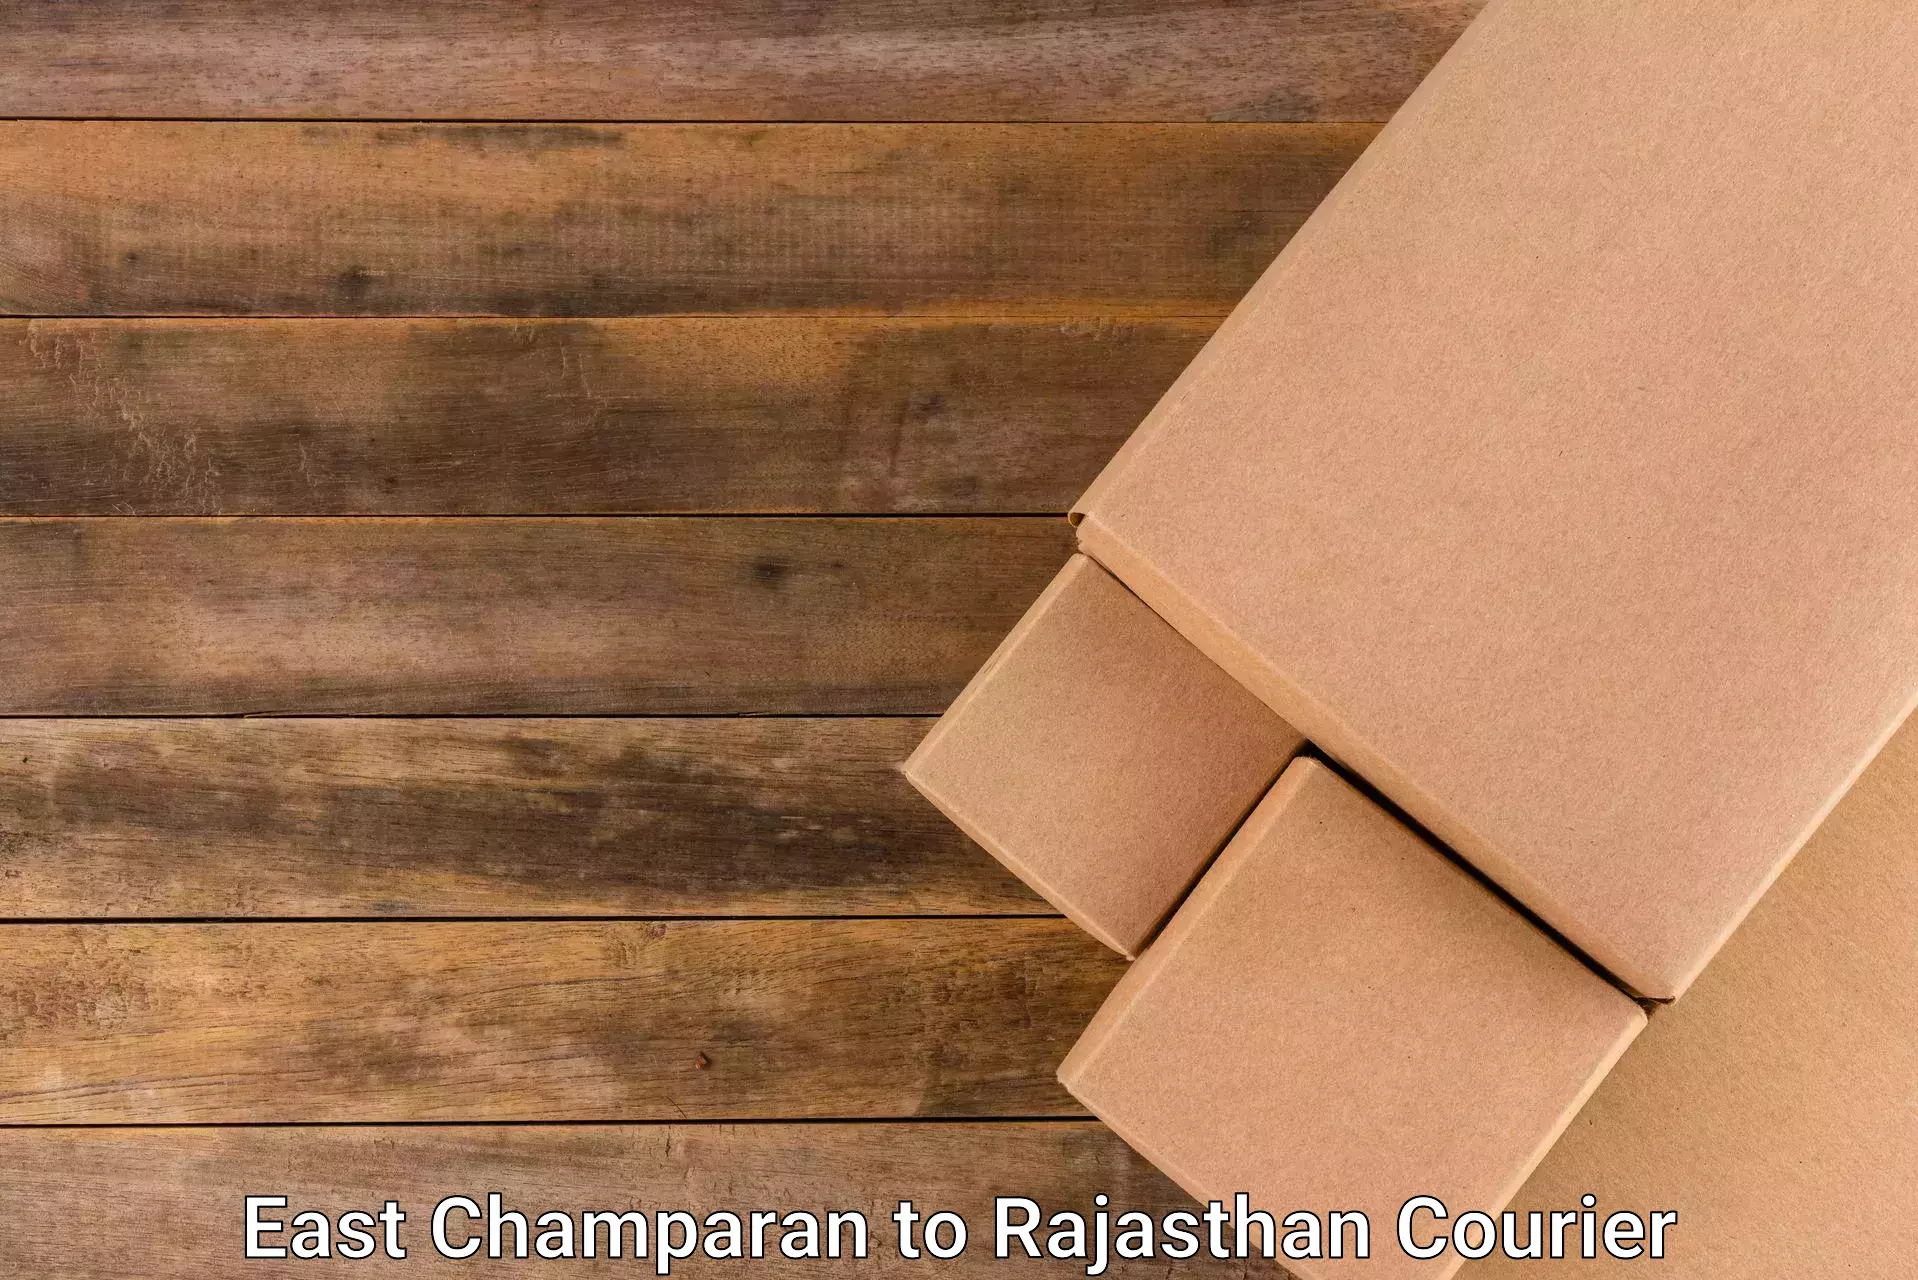 Business delivery service East Champaran to Dholpur